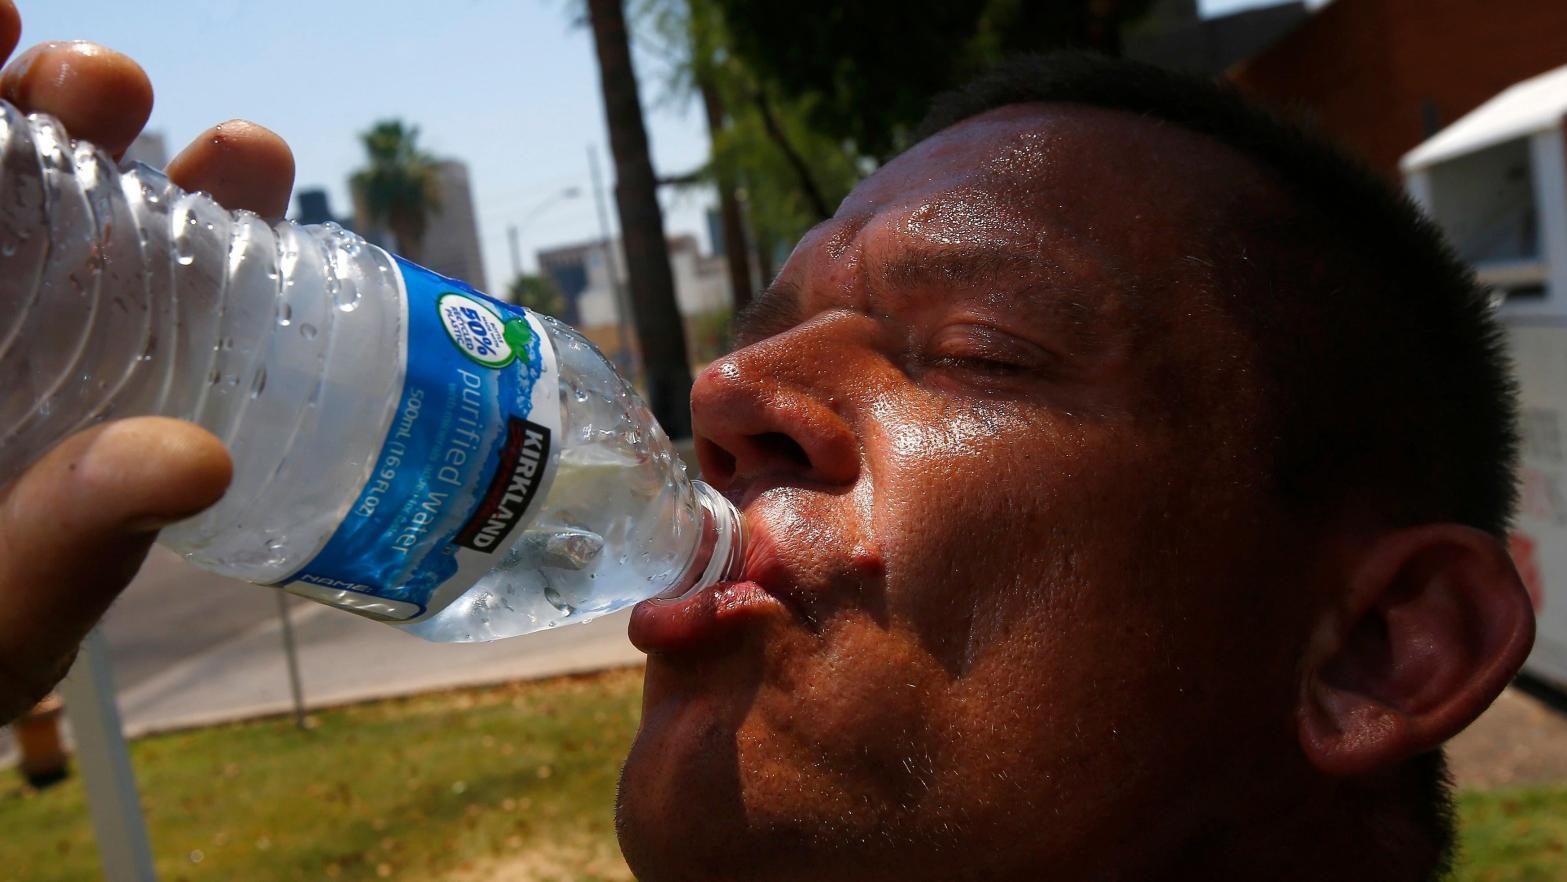 Steve Smith takes a drink of water as he tries to keep hydrated and stay cool as temperatures climb to near-record highs, in Phoenix in 2017. (Photo: Ross D. Franklin, AP)